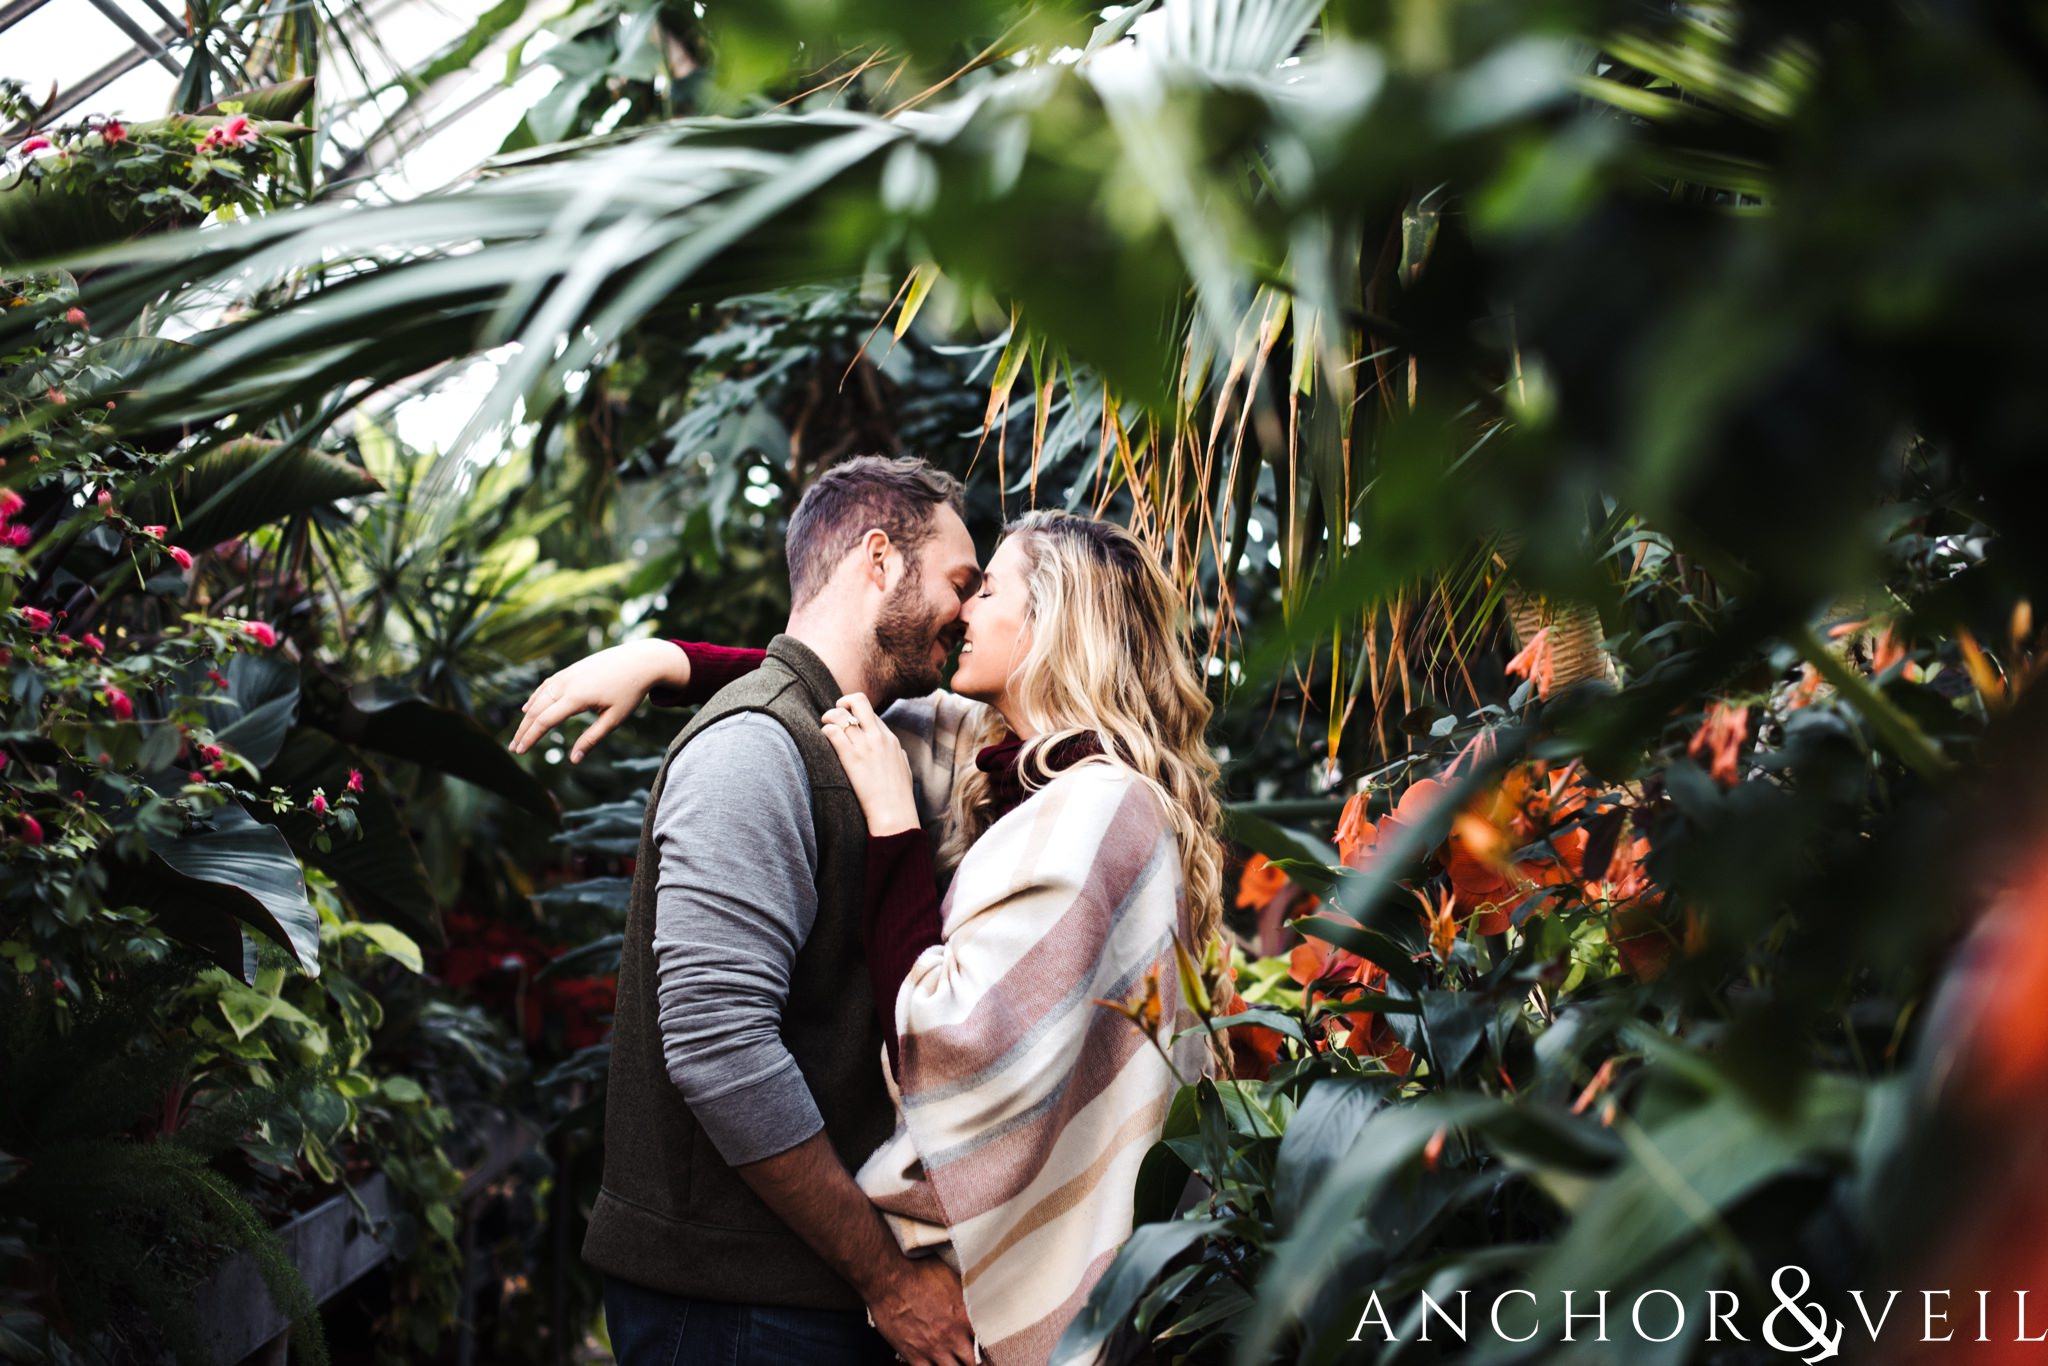 IN the greenhouse garden during their Snowy Biltmore Engagement Session